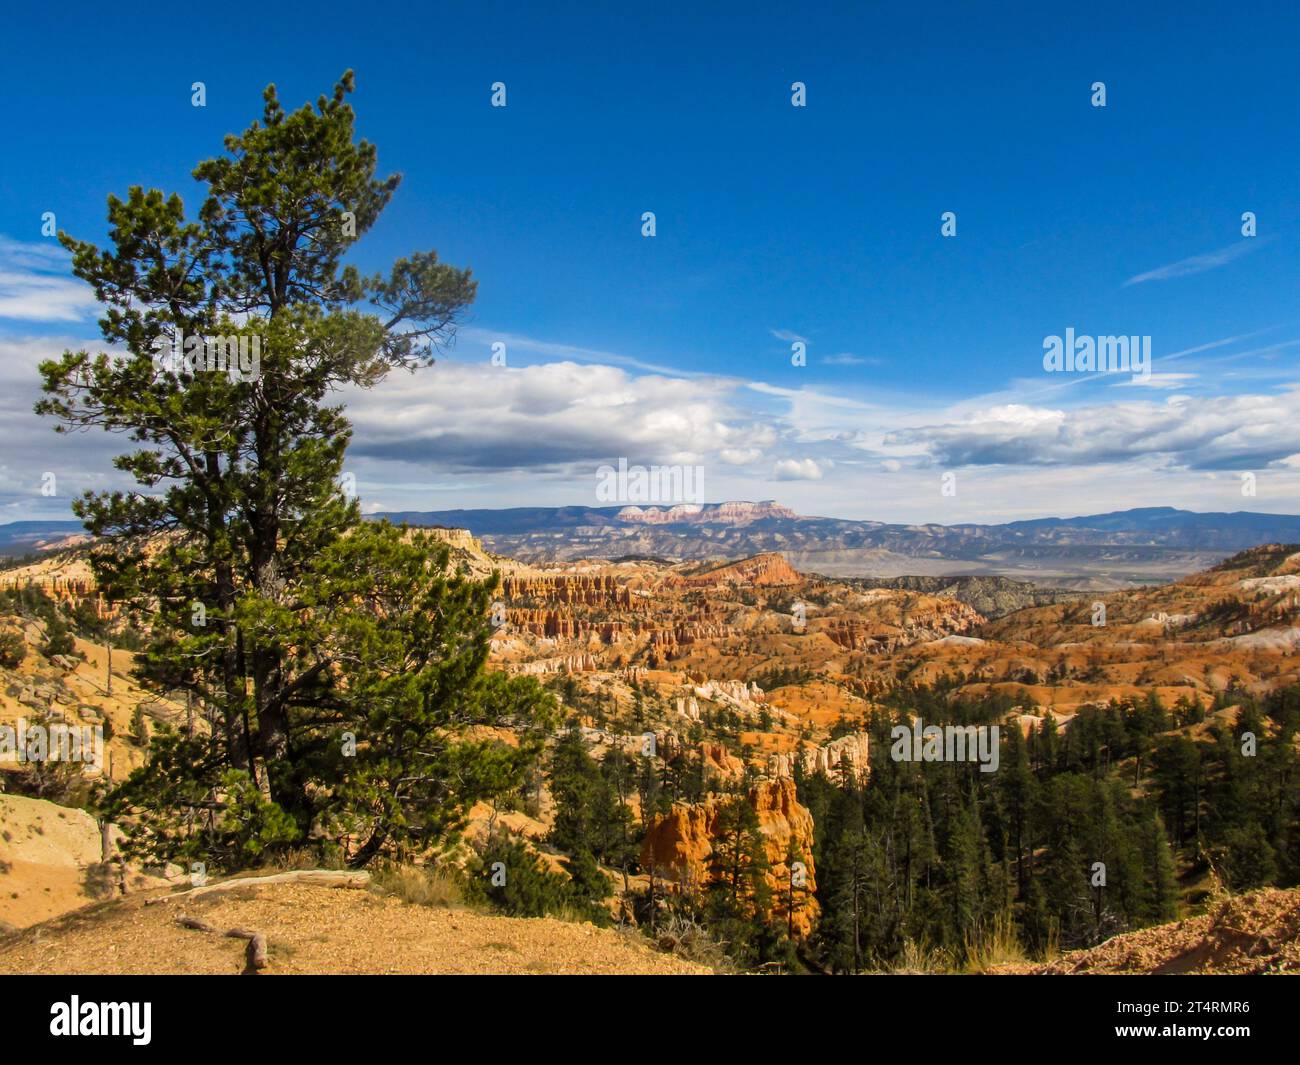 Large limber pine growing on the edge of Bryce Canyon with the dramatic hoodoo filled landscape in the background Stock Photo